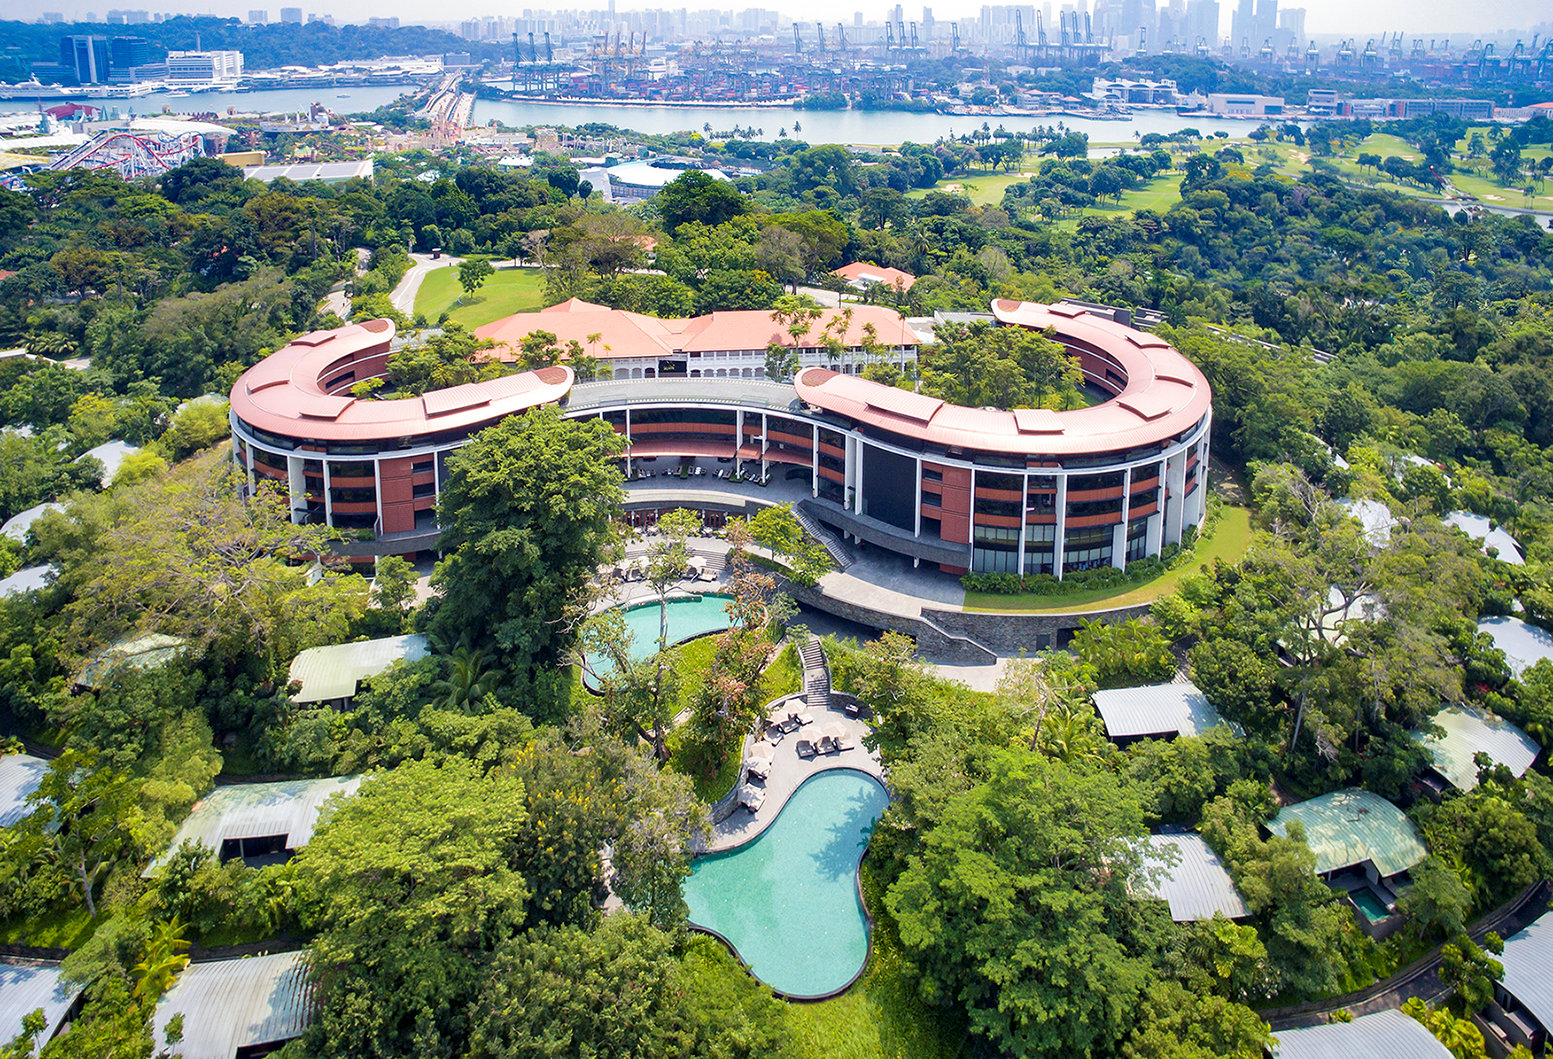 PHOTO: An undated handout photo of Capella hotel on Sentosa island, Singapore, released June 5, 2018.